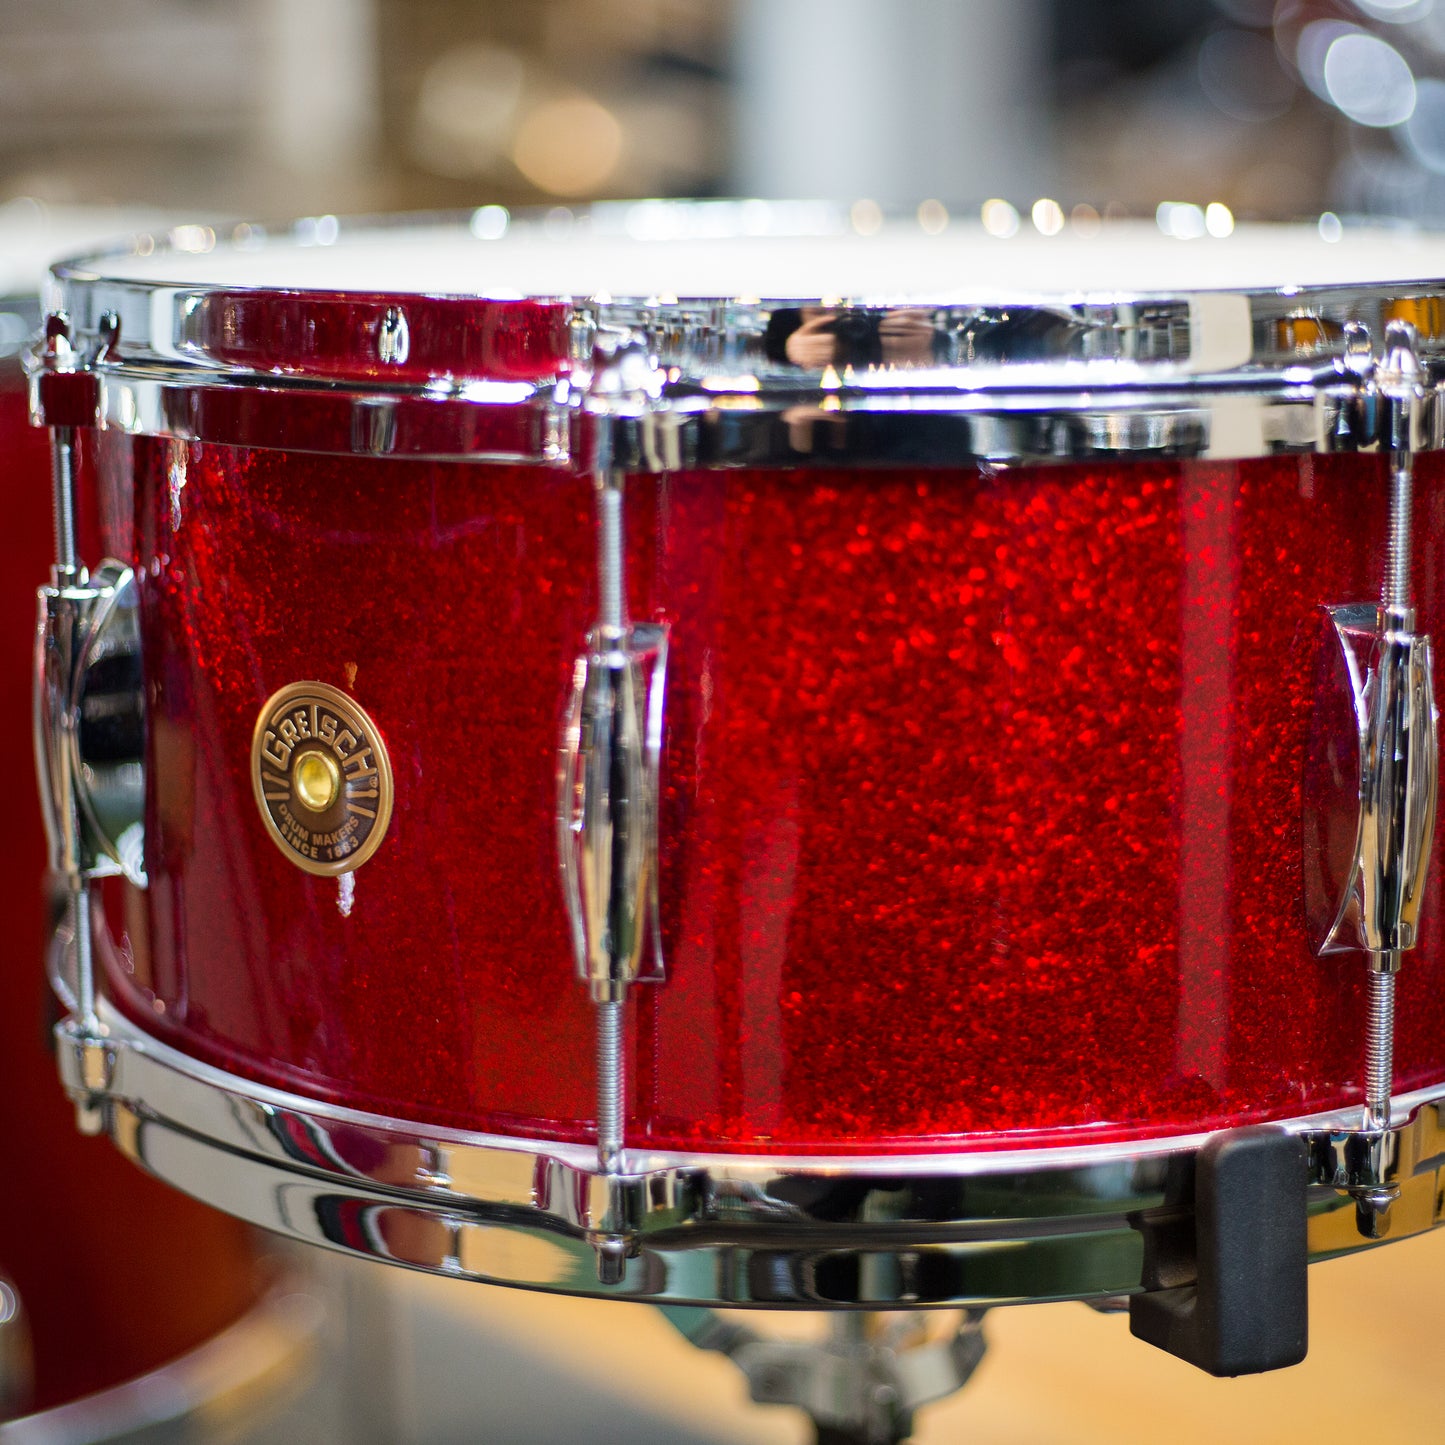 Gretsch USA Custom 4 Piece Shell Kit in Red Sparkle (GRNT244PC013)